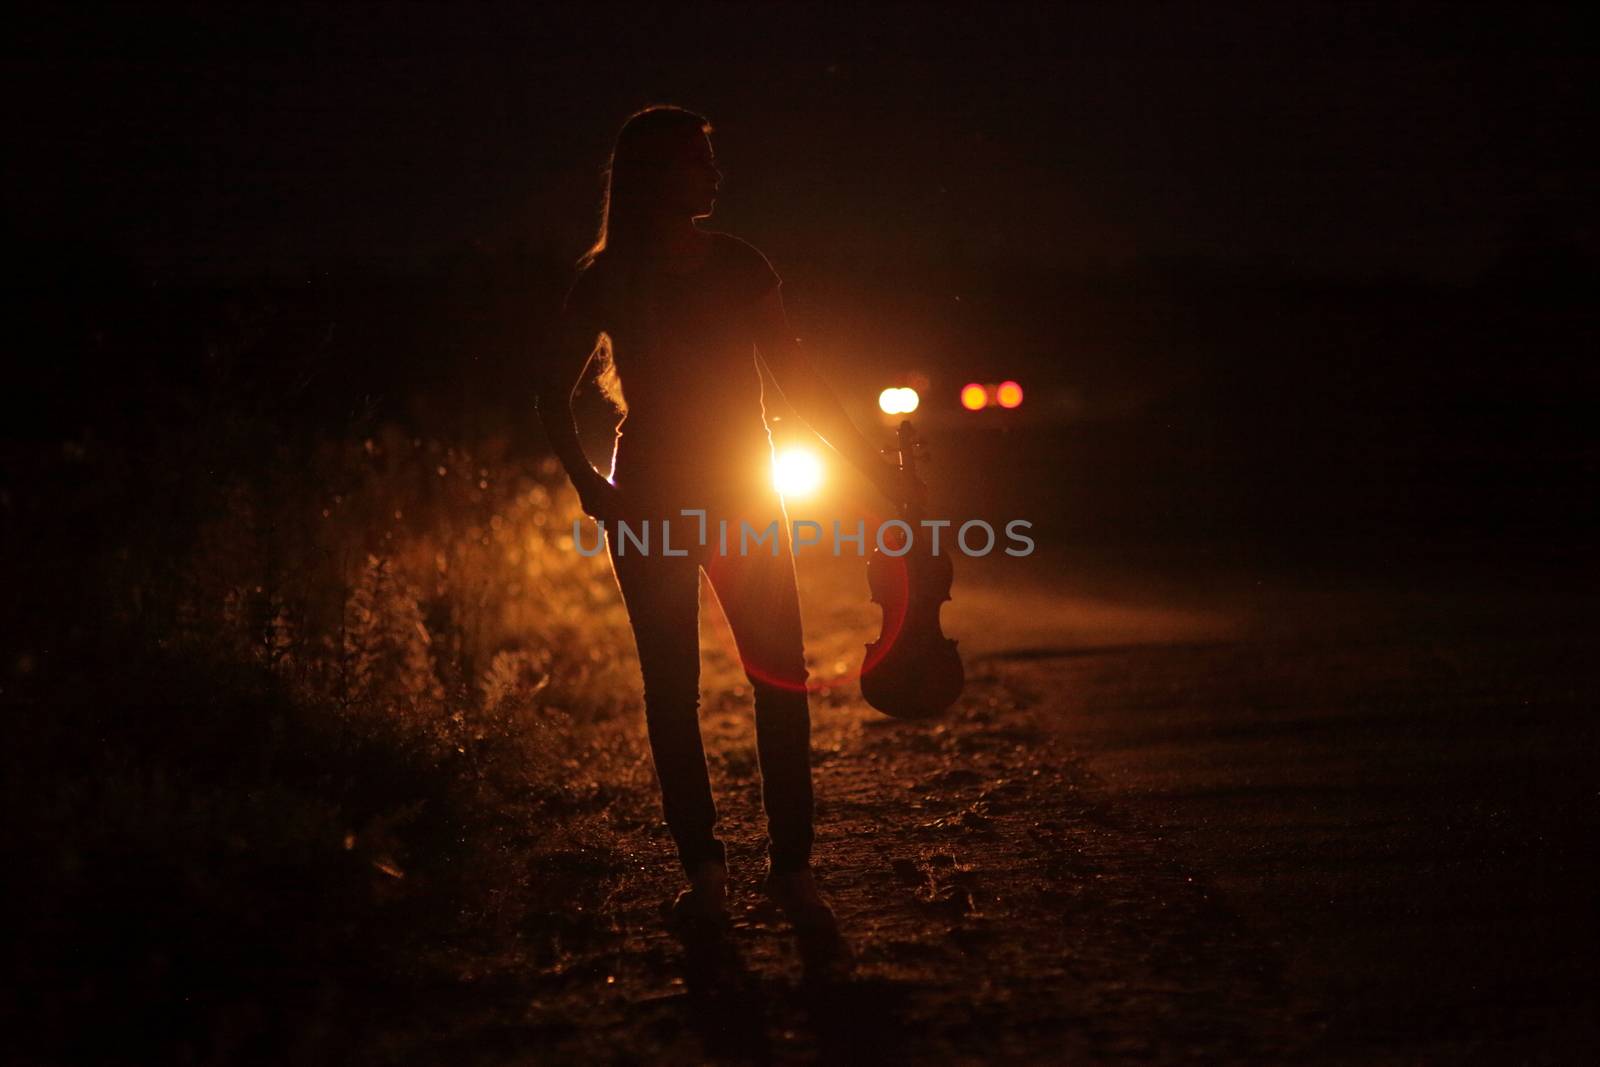 Silhouette of a slender young woman with violin in car headlights illumination by selinsmo